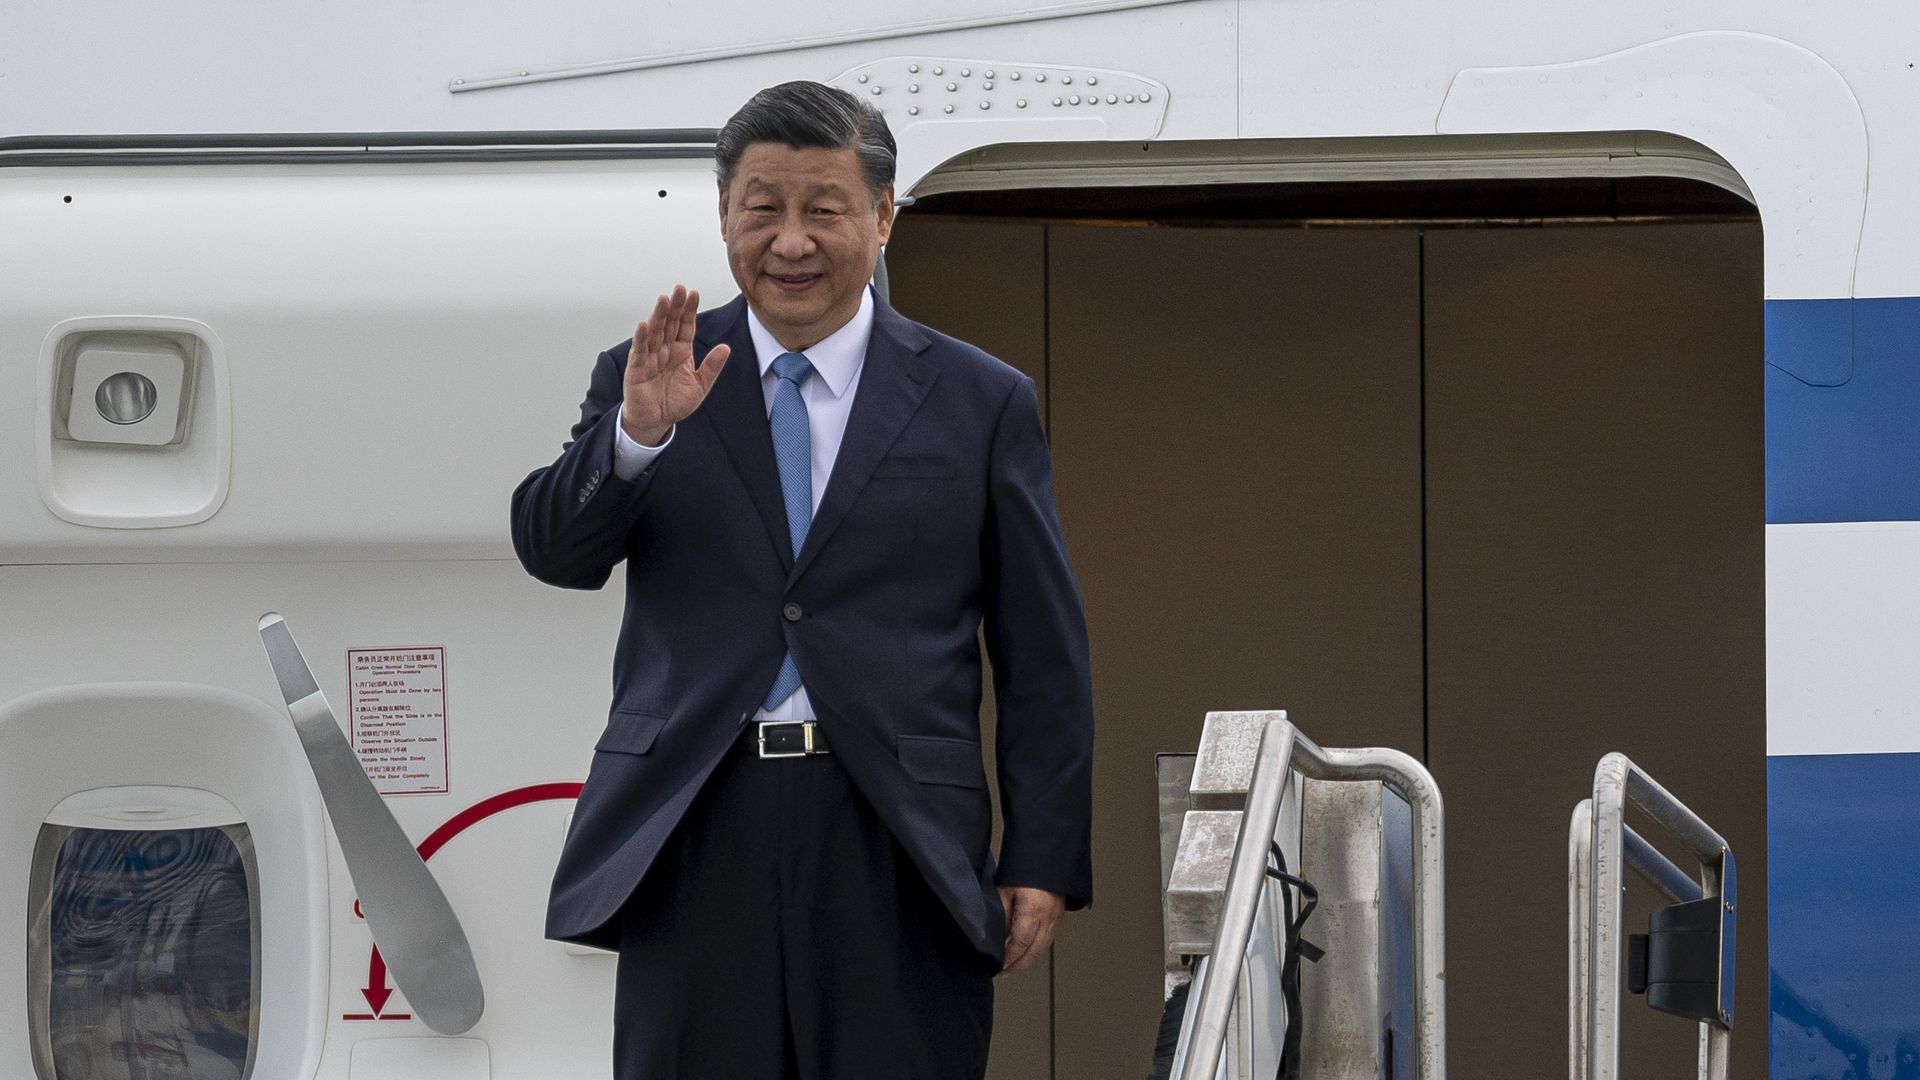 Xi Jinping arrives at San Francisco International Airport on the sidelines of the Asia-Pacific Economic Cooperation summit in San Francisco, California, US, on Tuesday, Nov. 14, 2023. Photo credit: David Paul Morris/Bloomberg via Getty Images